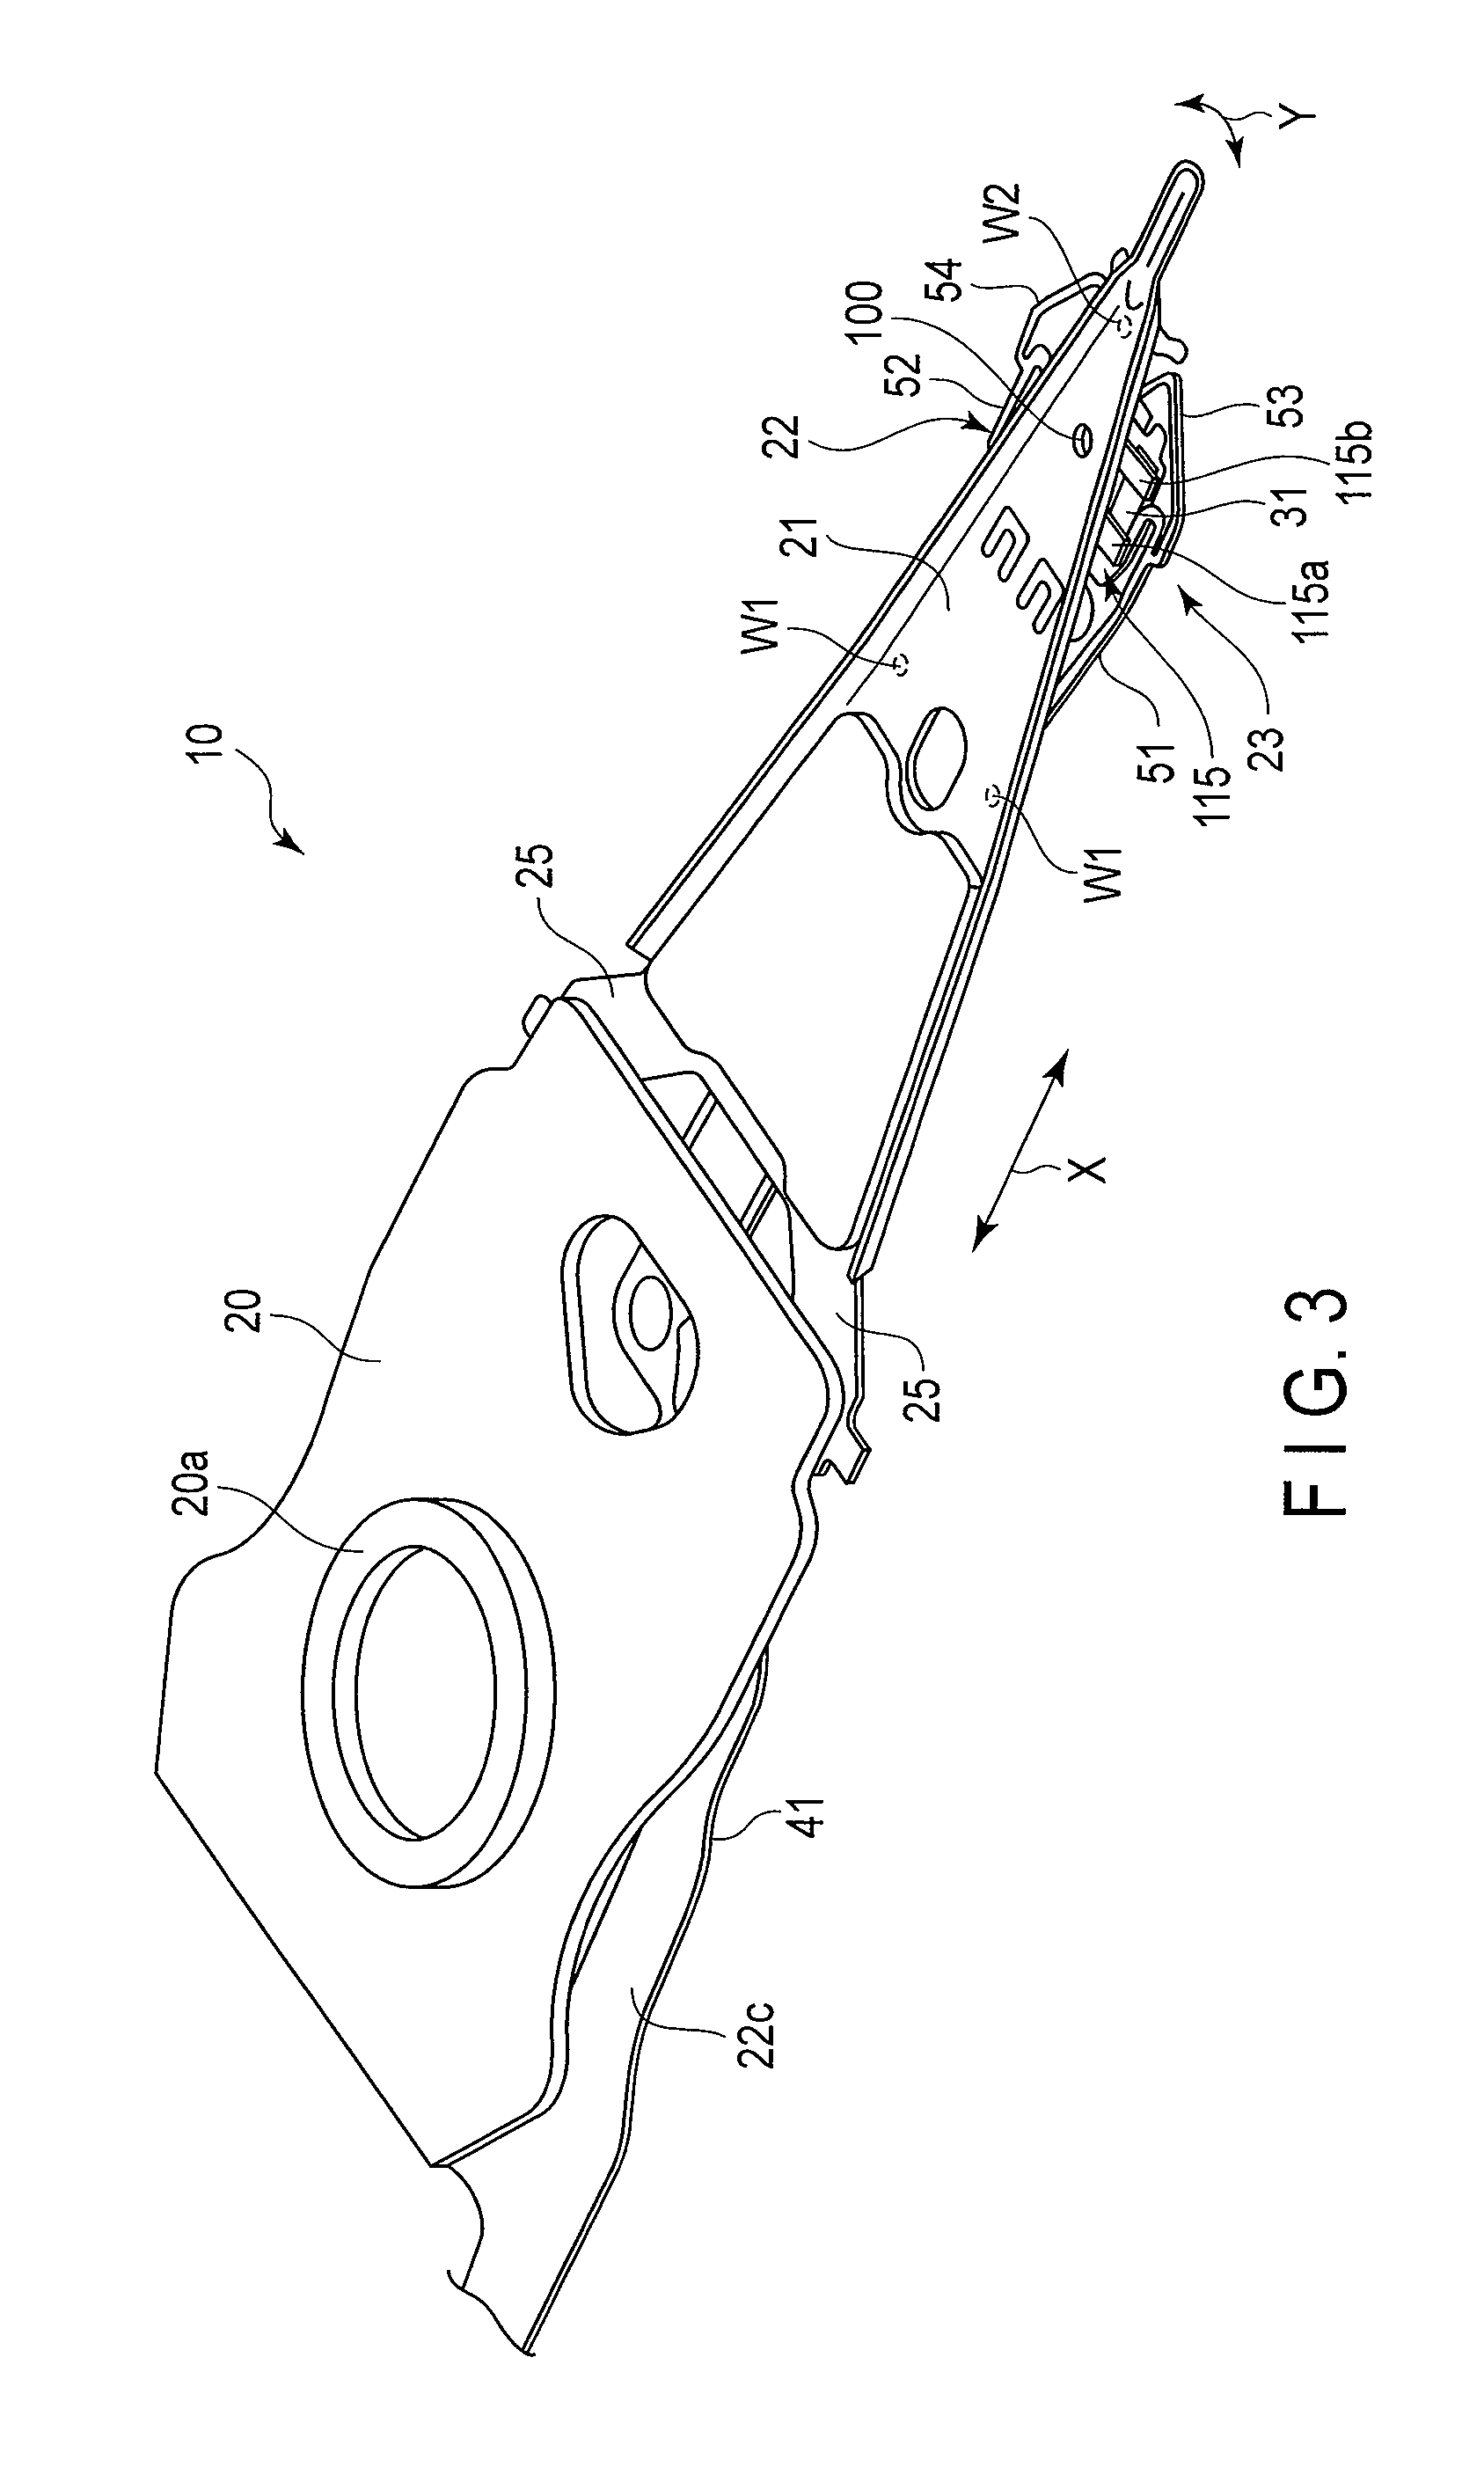 Disk drive suspension with microactuator elements on respective slider sides and damper member on gimbal portion away from dimple